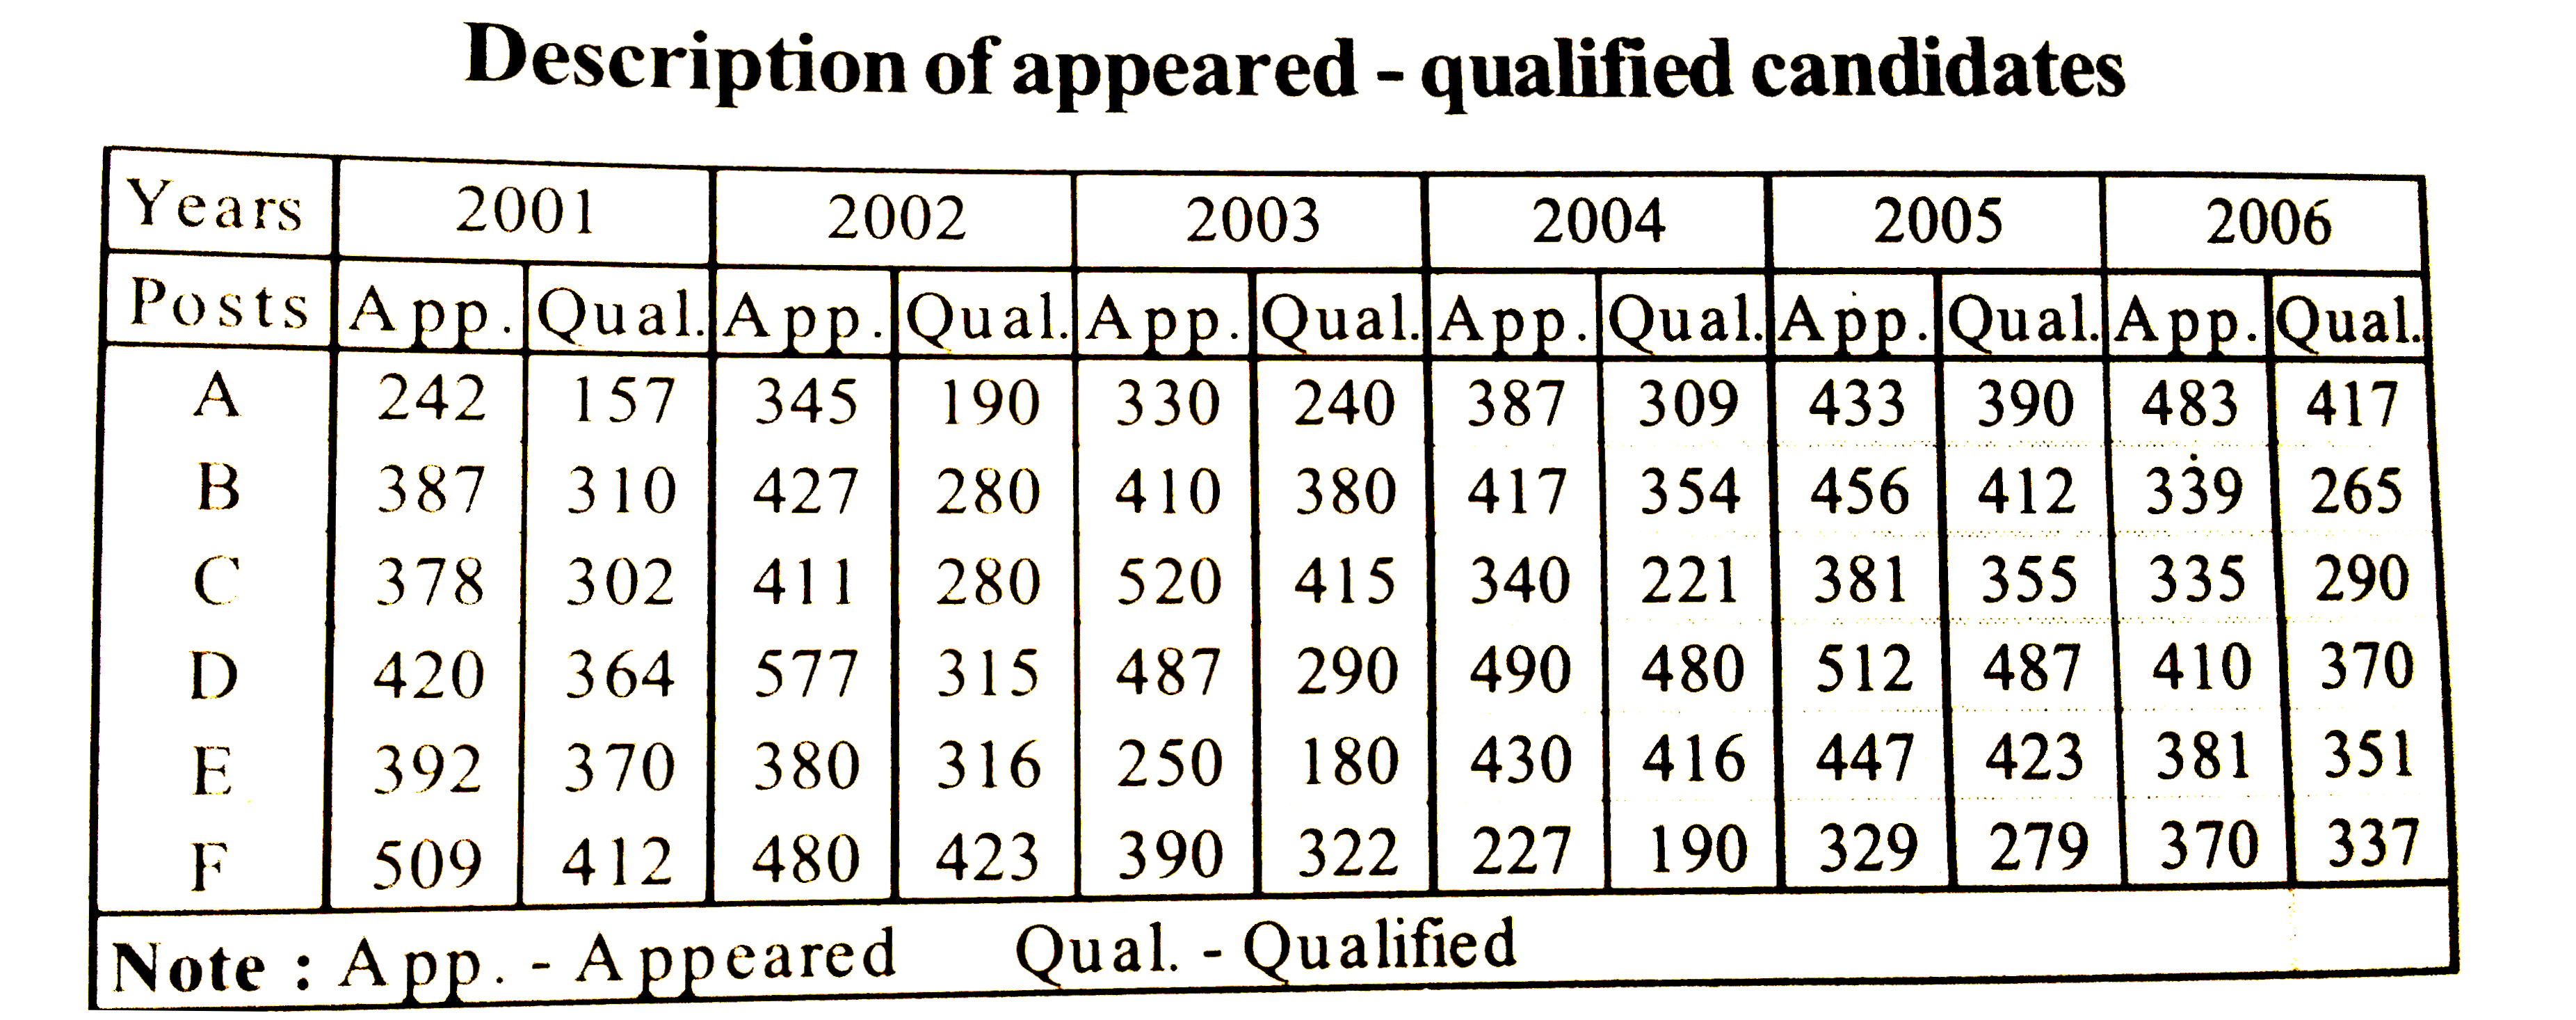 What approximate percentage of candidates qualified for the post of A in the year 2003 ?